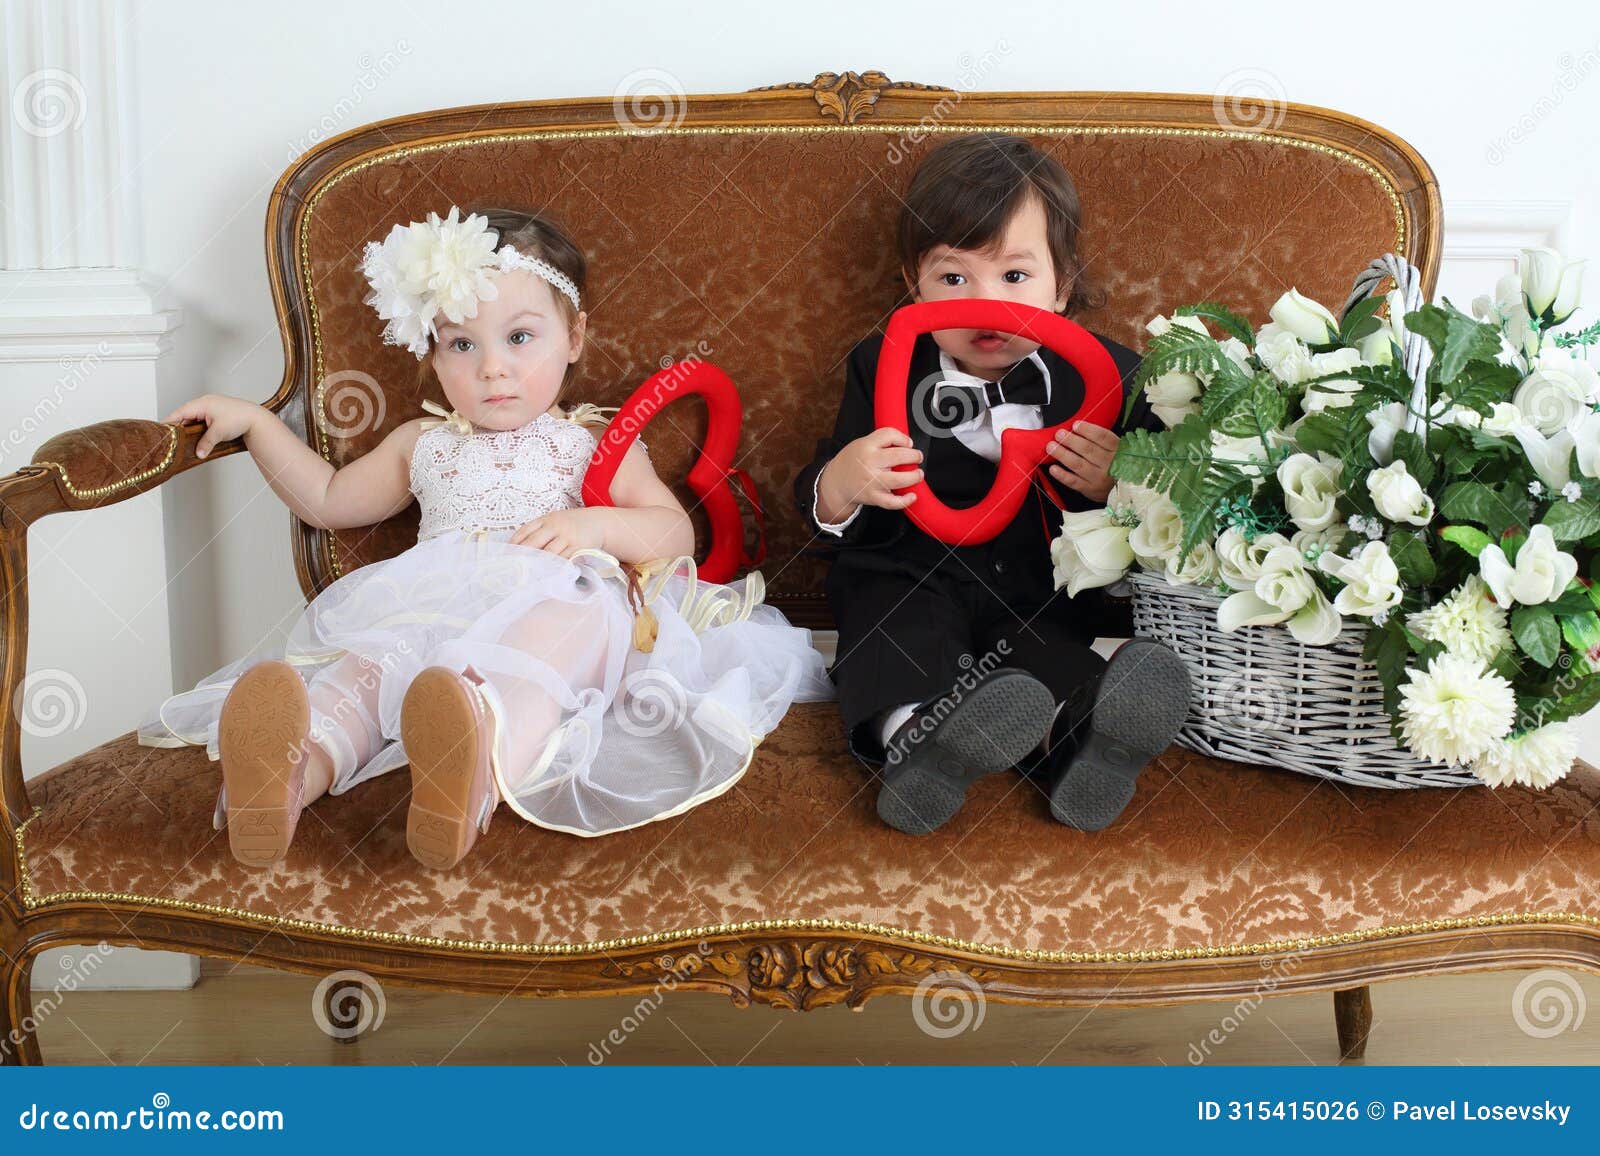 beautiful little kids in costumes bride and groom